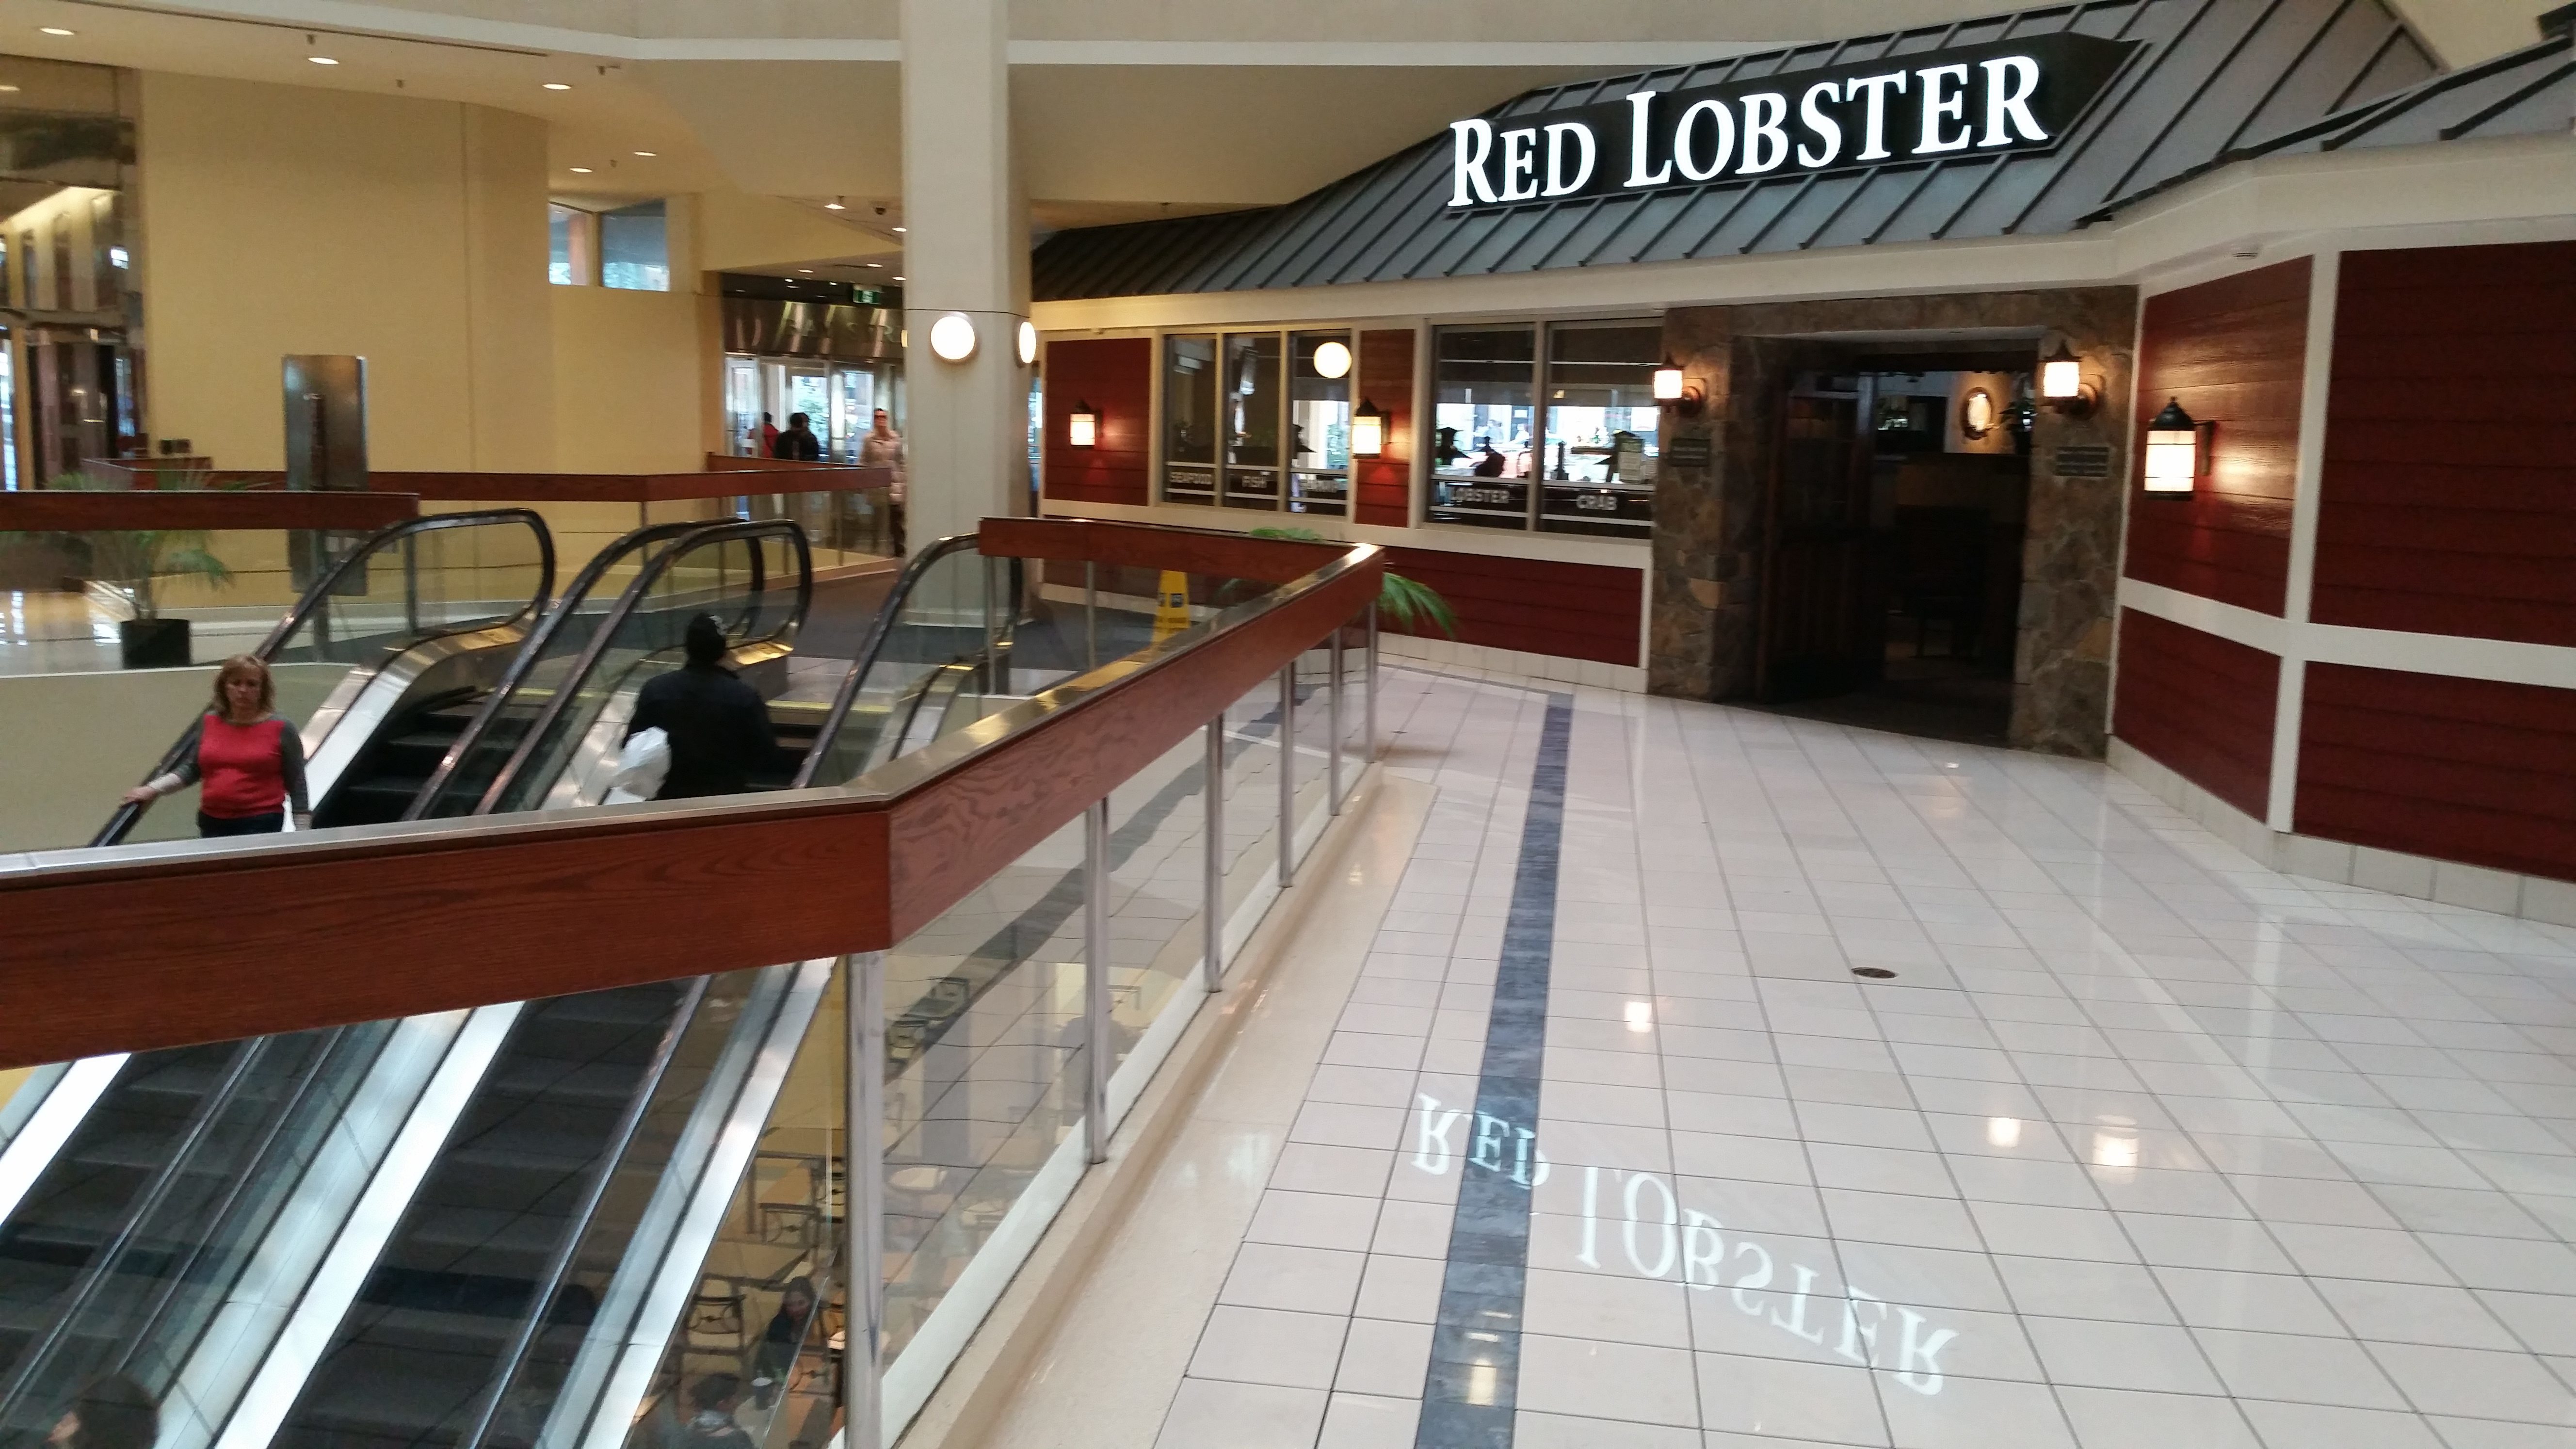 The Red Lobster Entrance from the mall